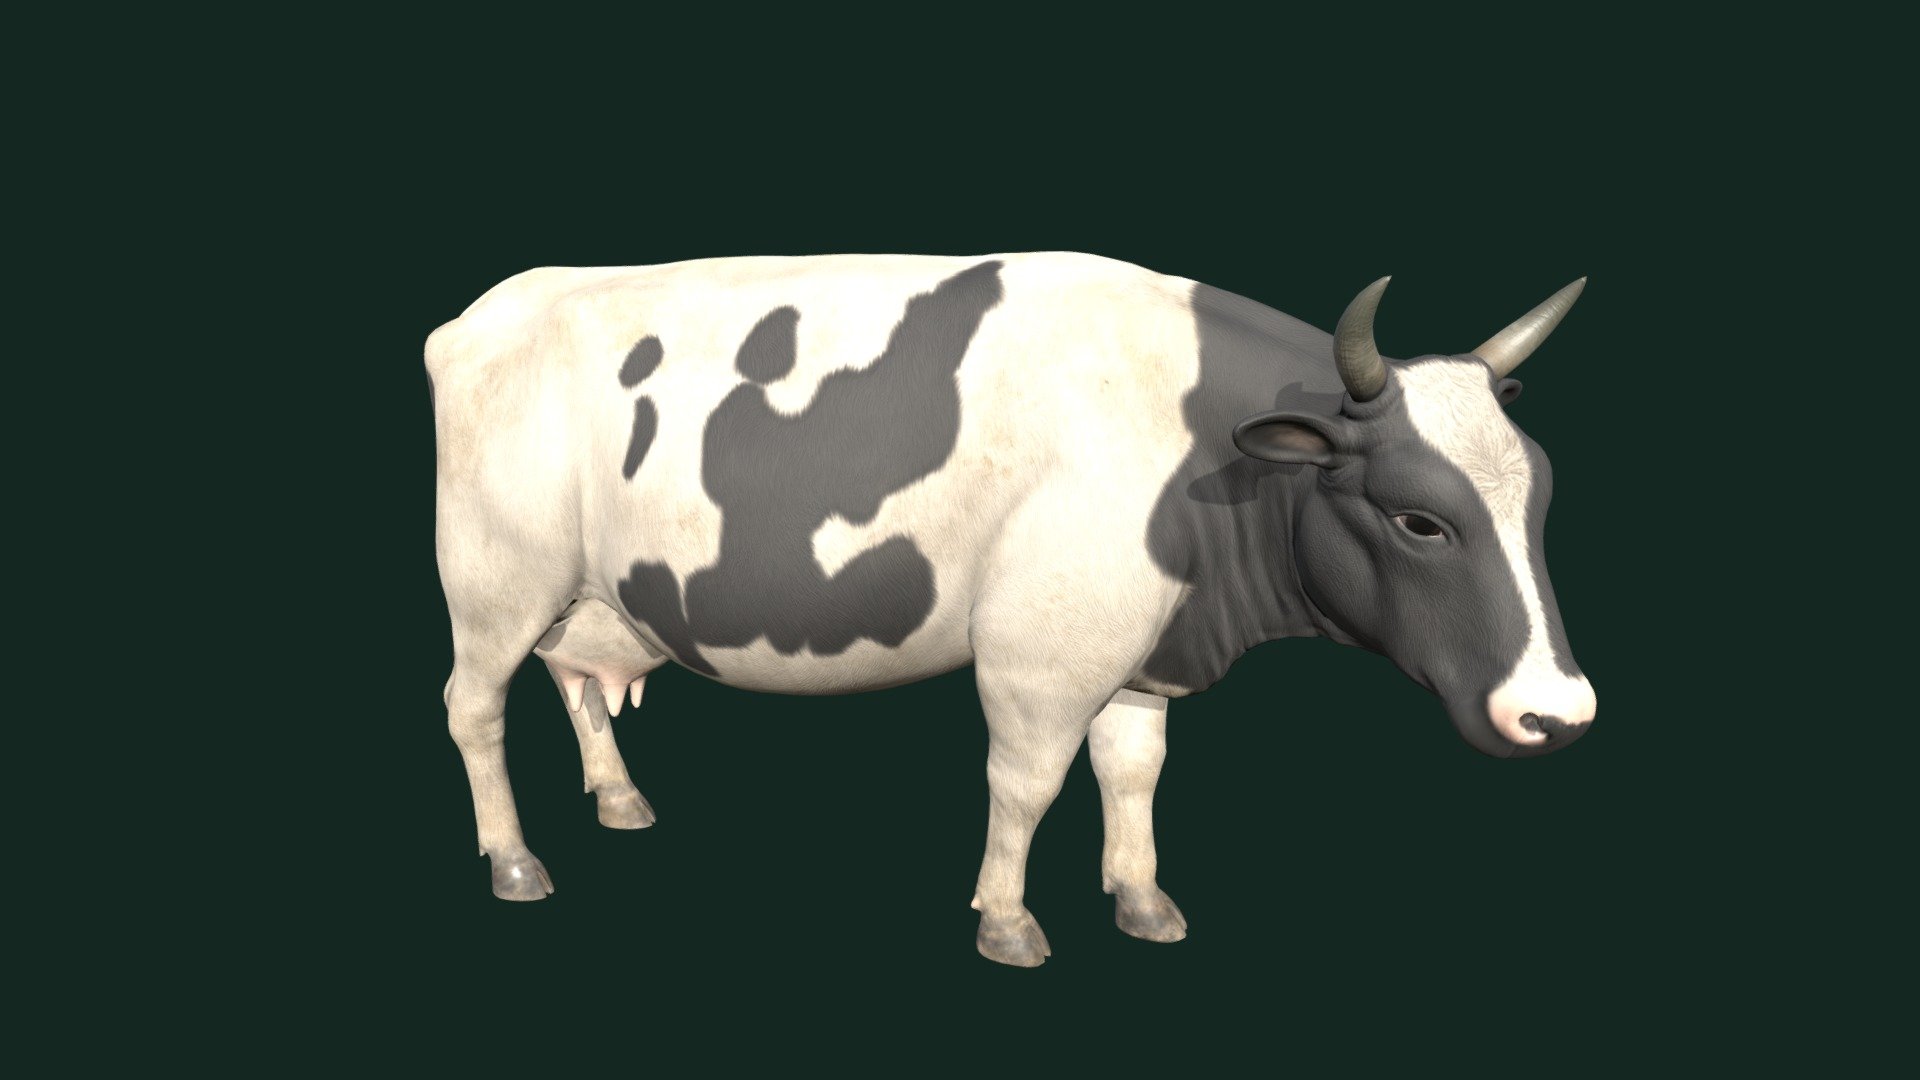 Simple idle for this cow
&ldquo;Cow